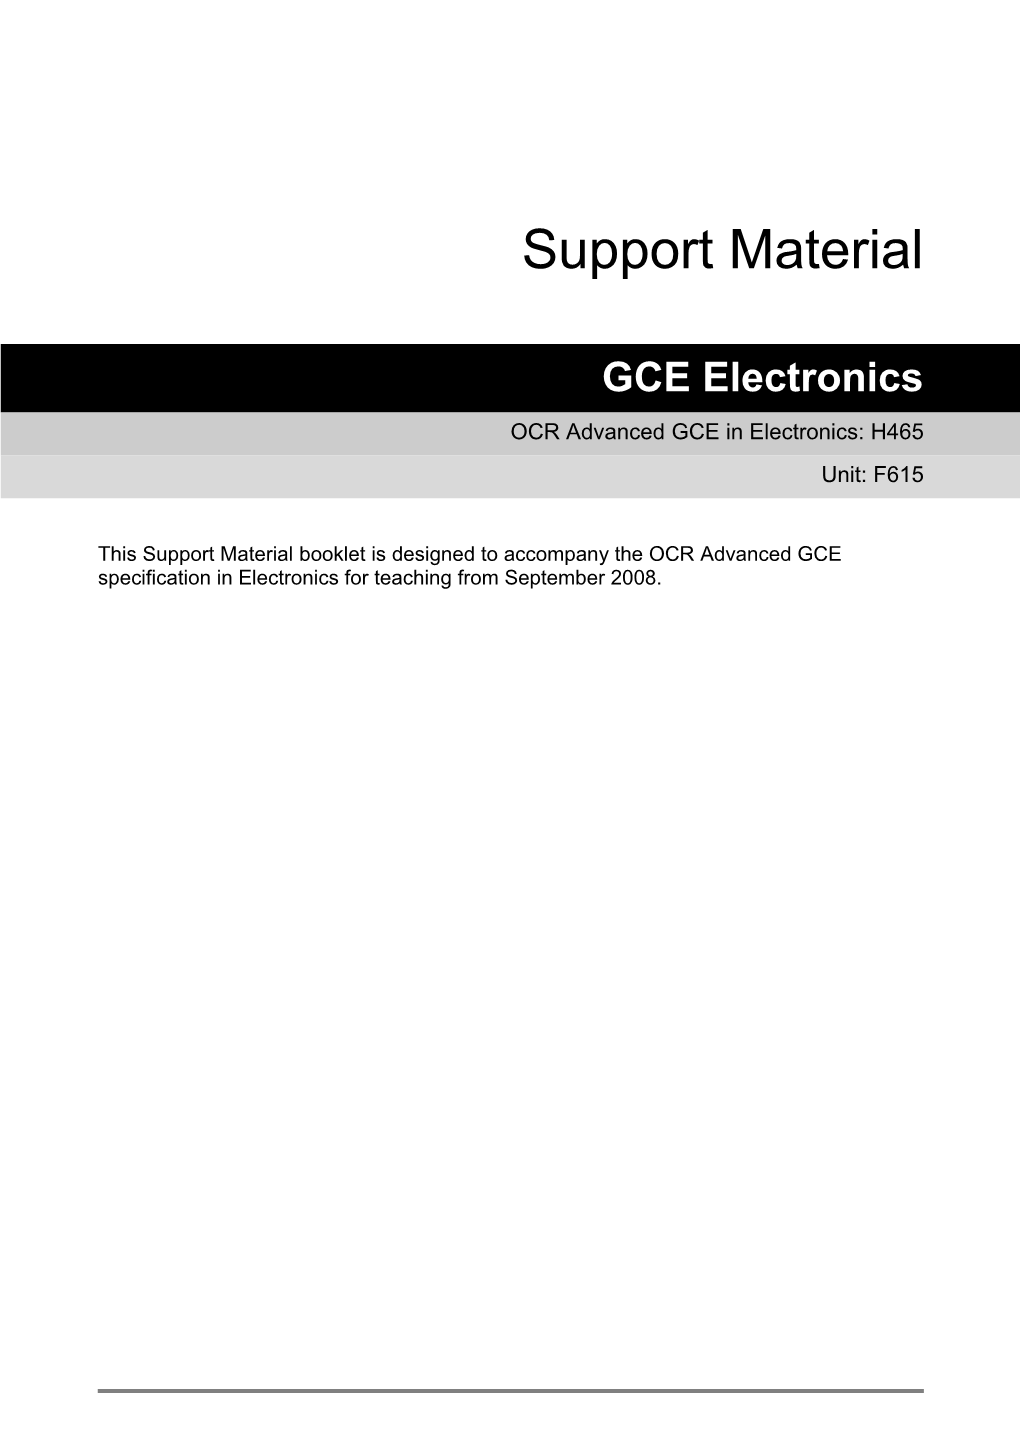 OCR Advanced GCE in Electronics: H465